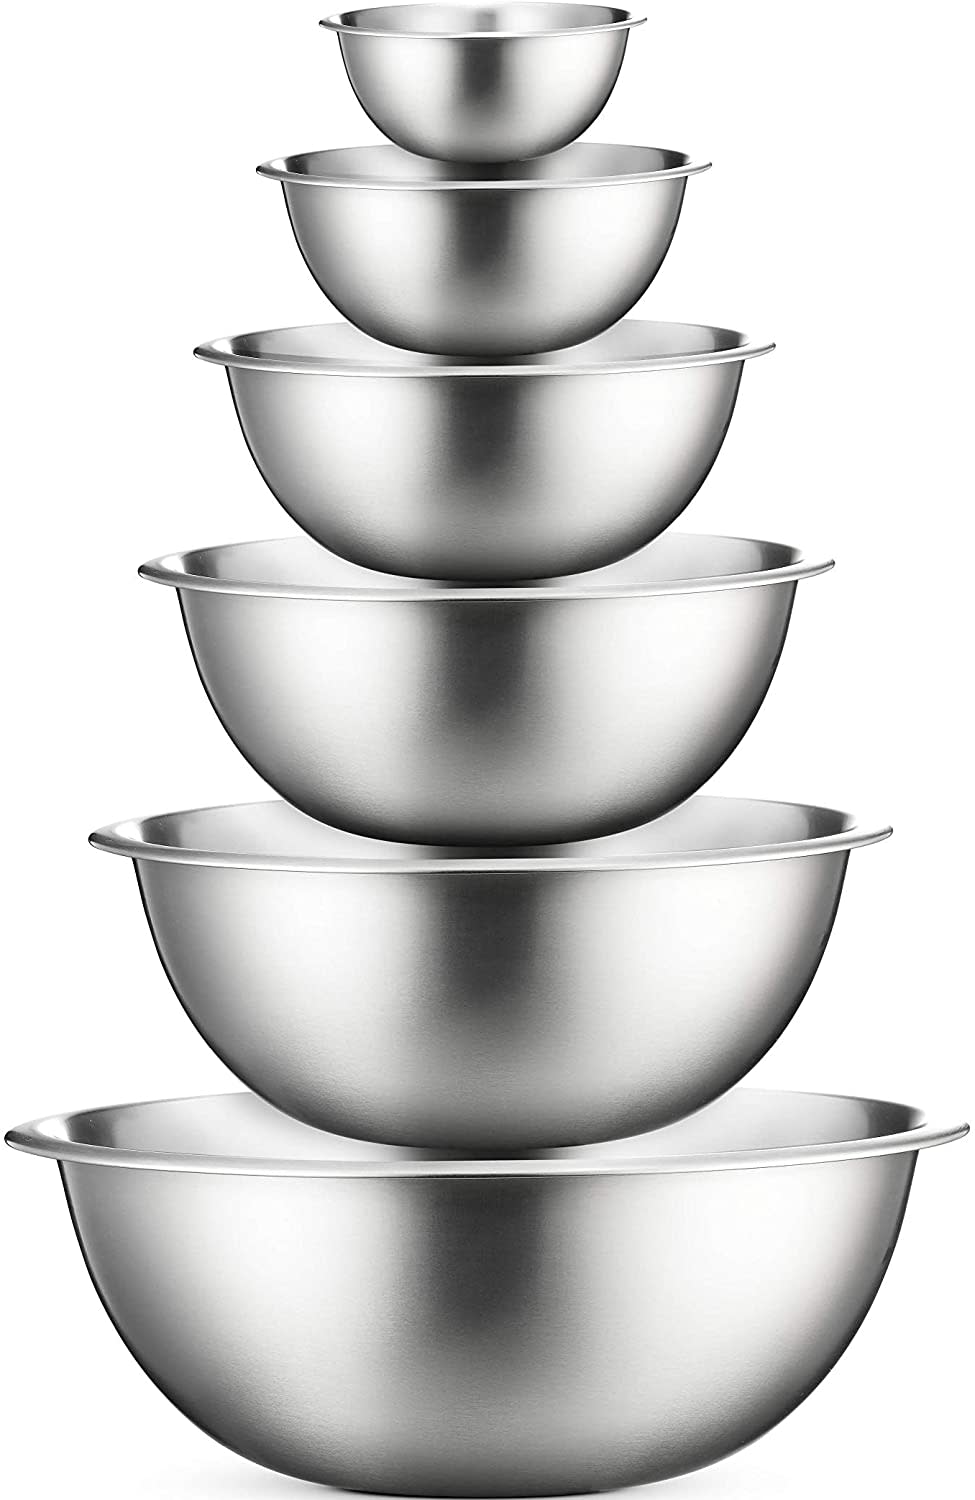 FineDine Stainless Steel Mixing Bowls, gifts for mom